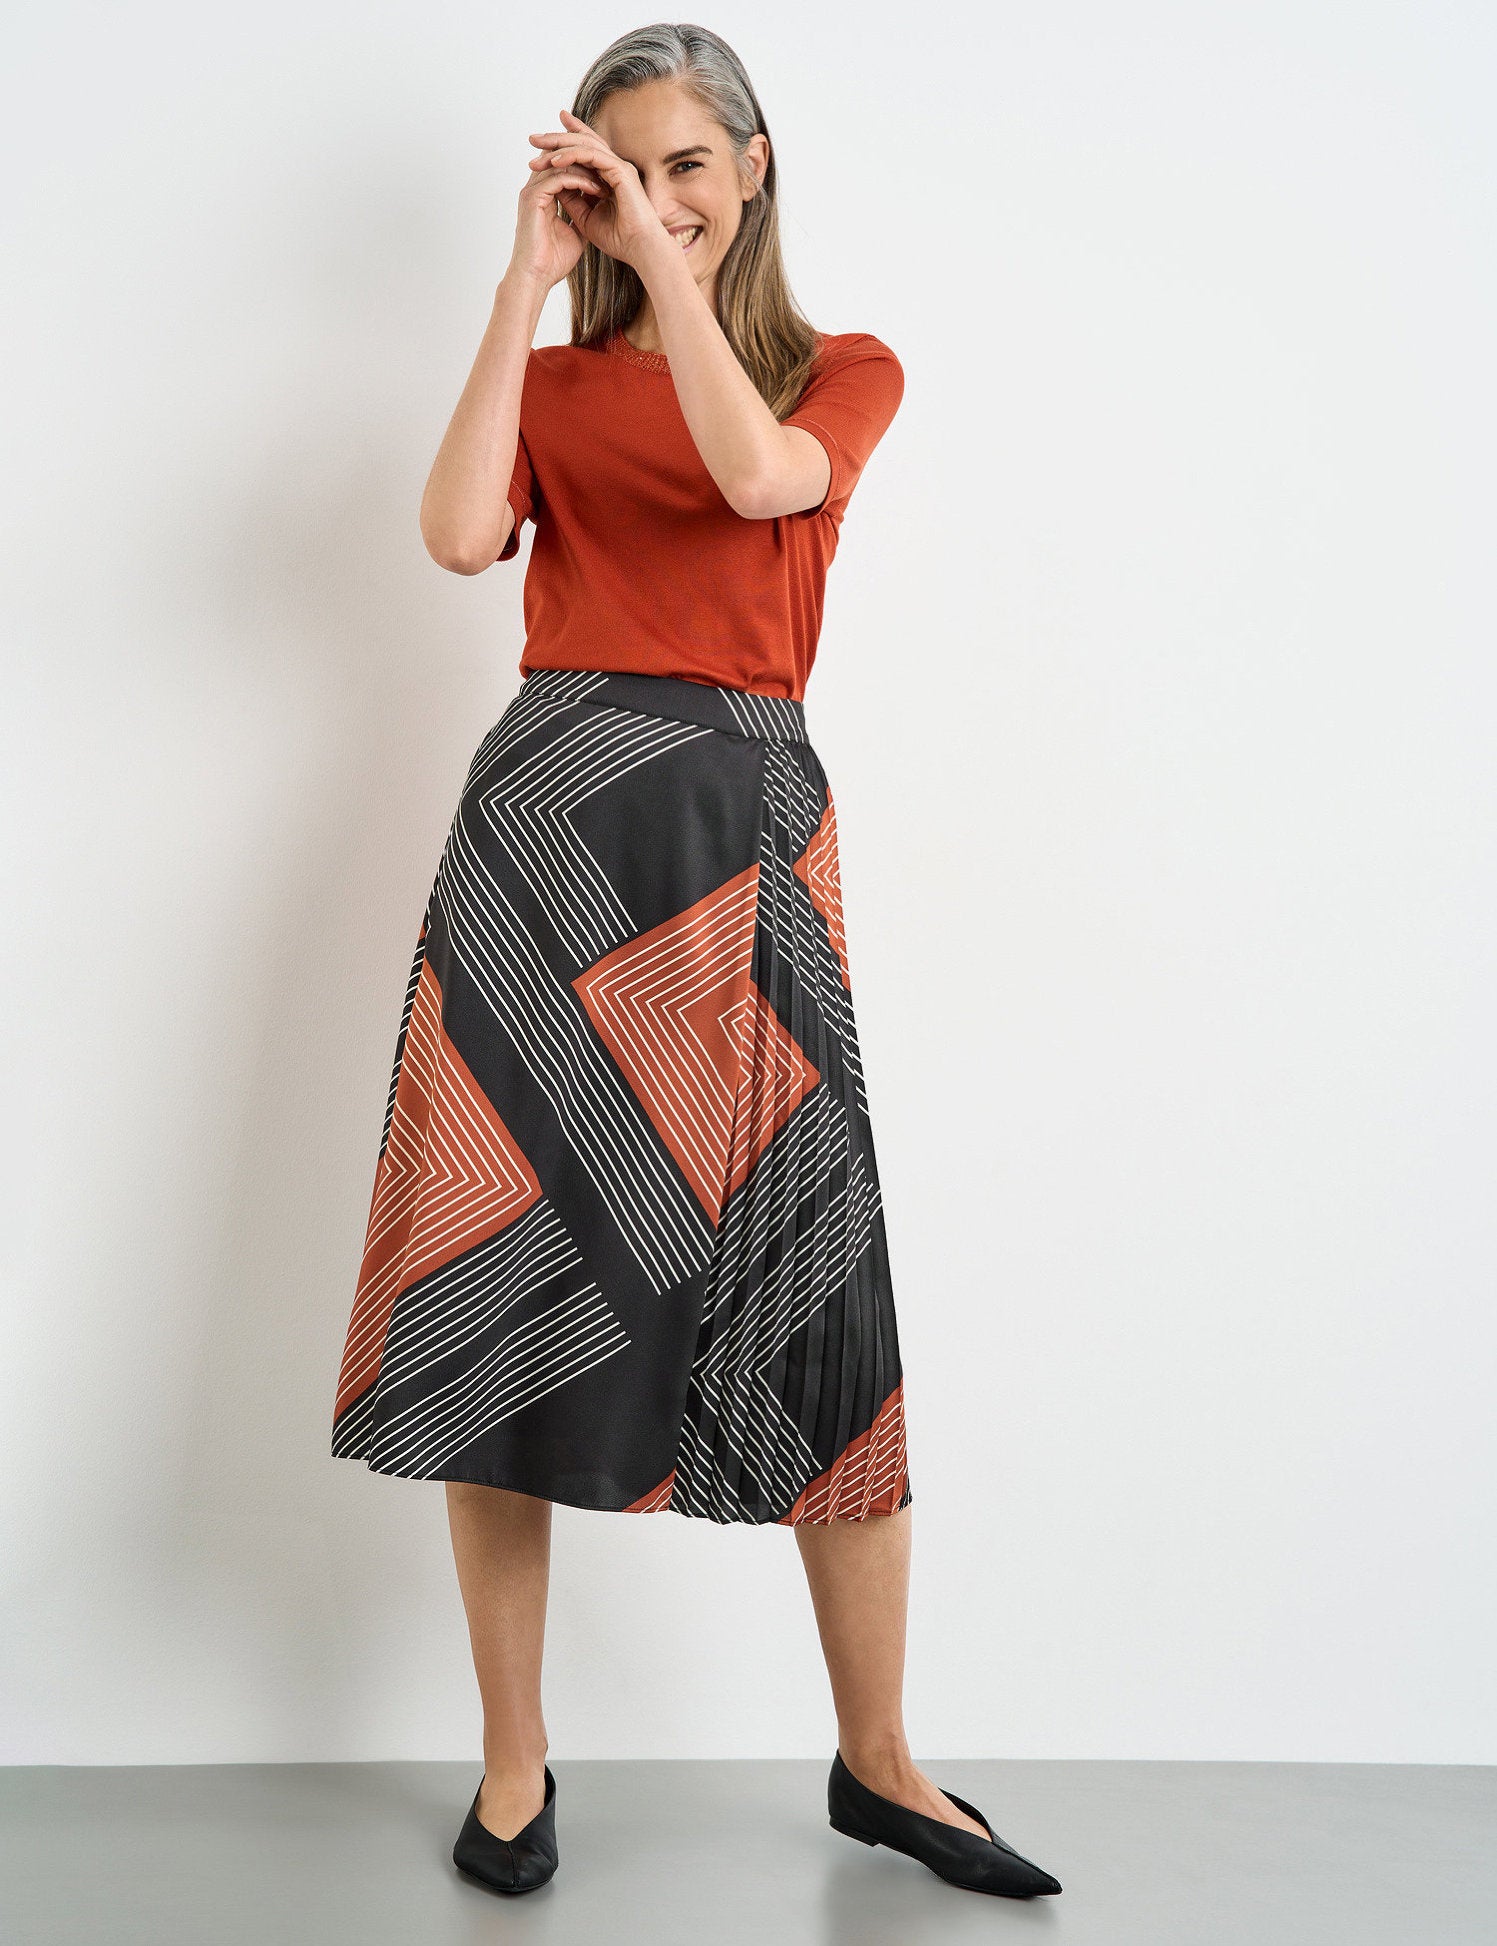 Midi Skirt With Pleated Detail_210016-31515_2070_05